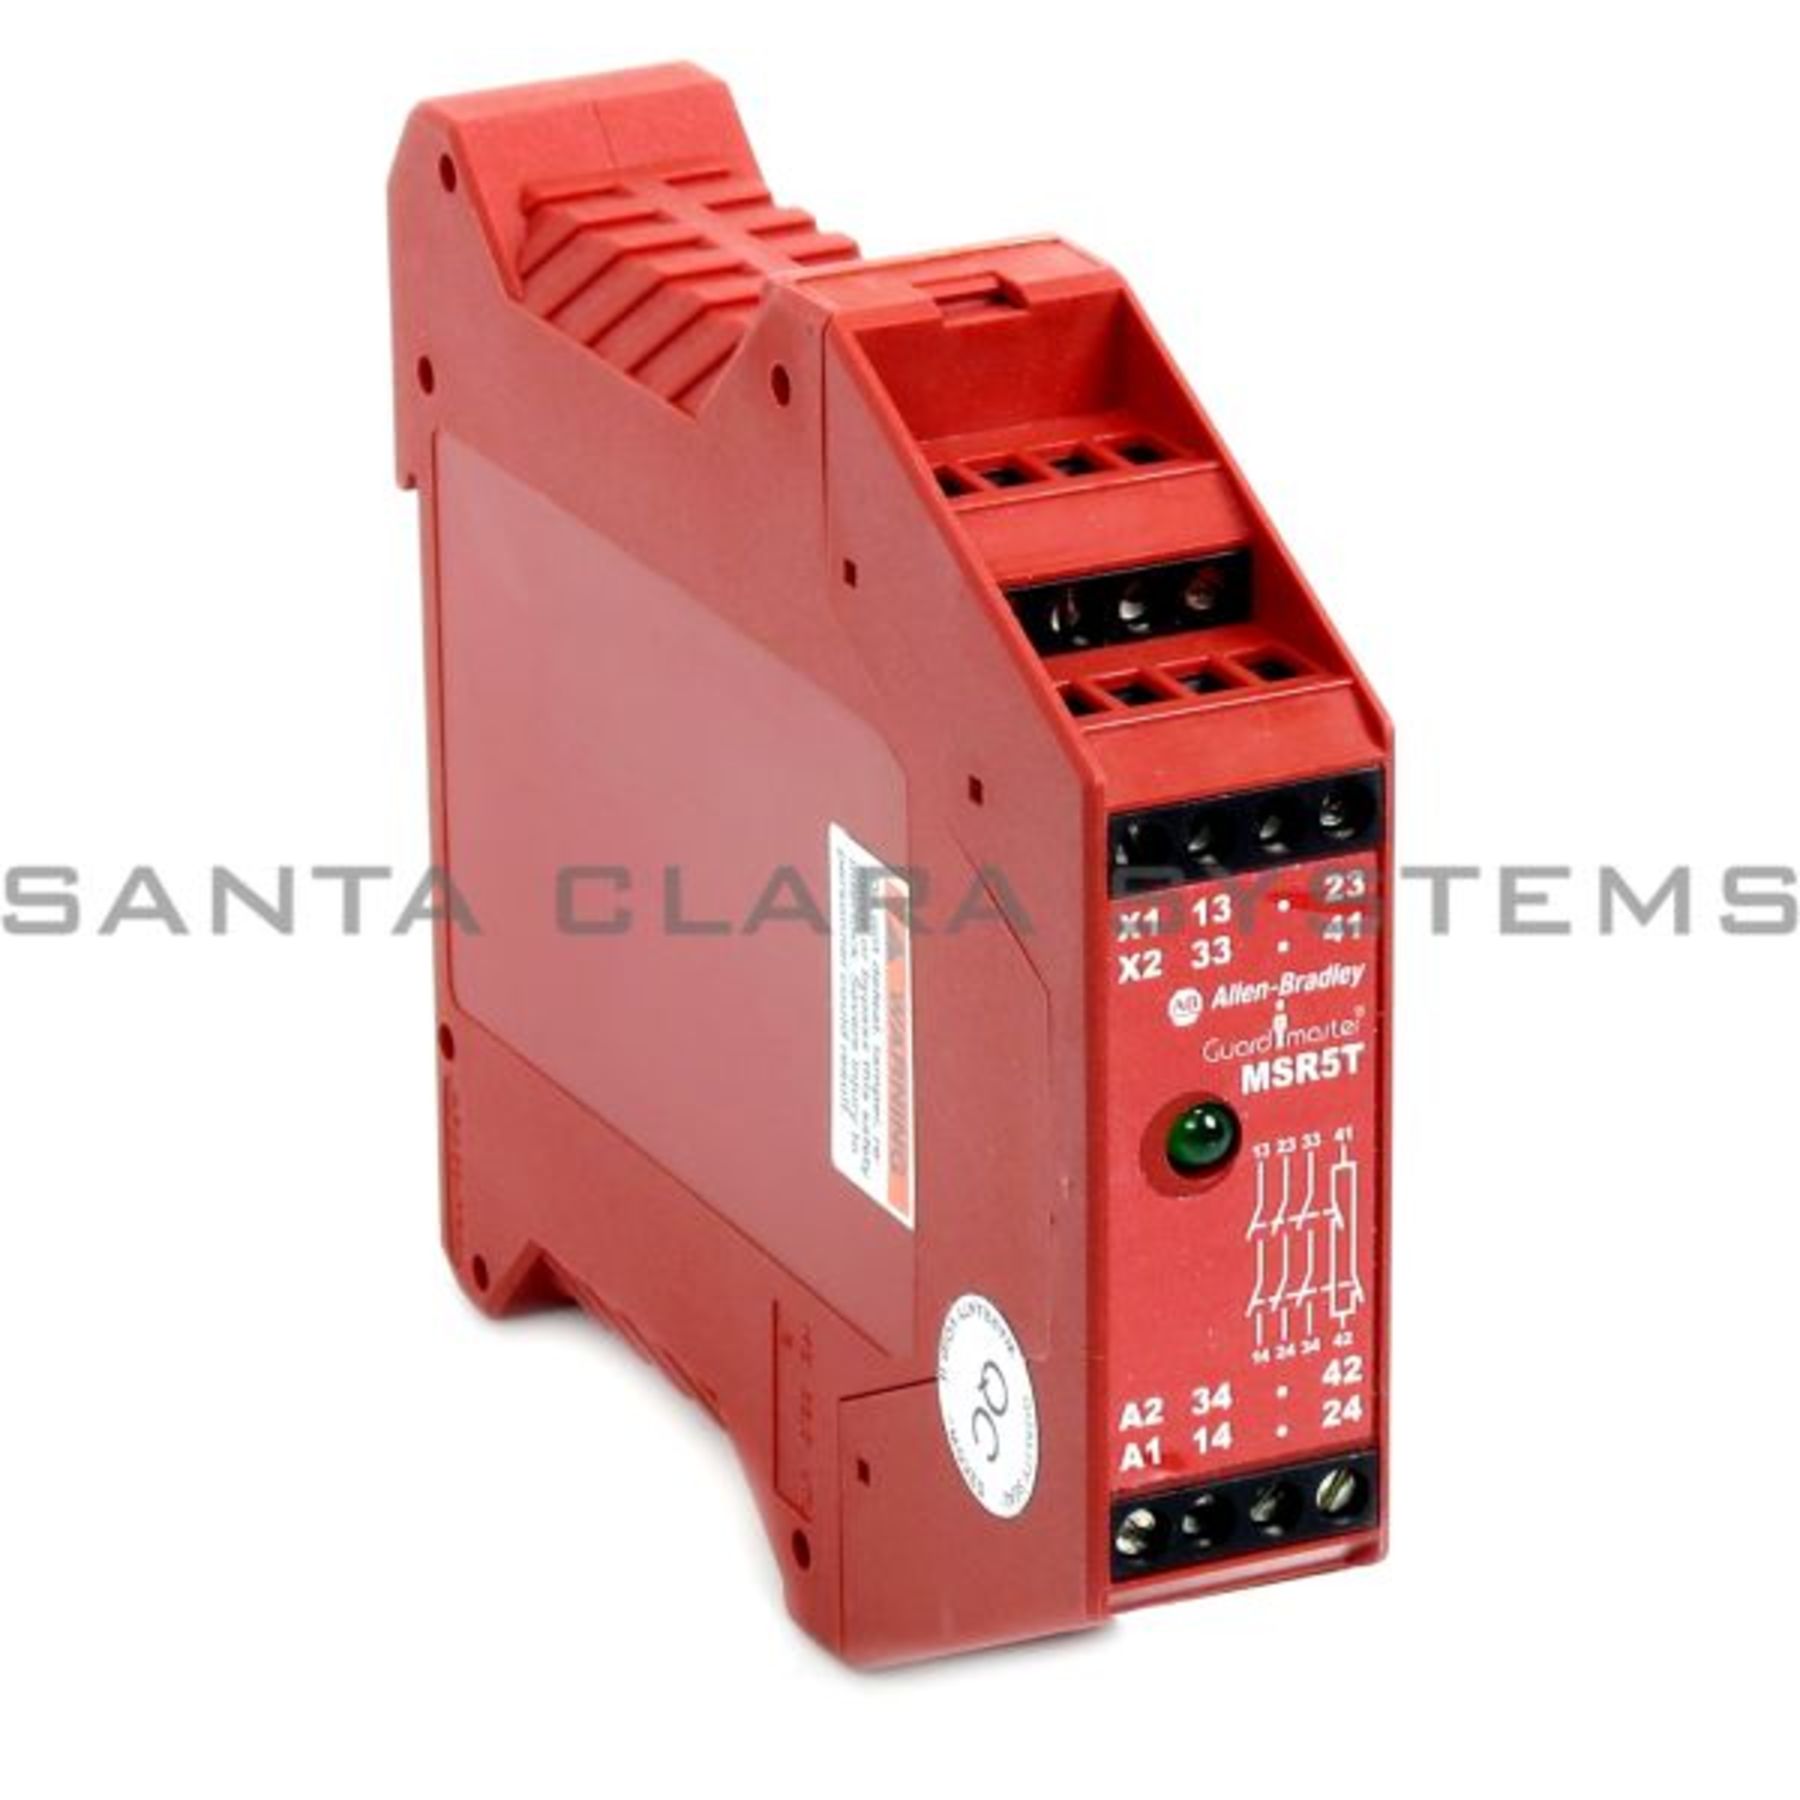 1PC NEW Safety relay 440R-B23020 free shipping  #WR103 WX 